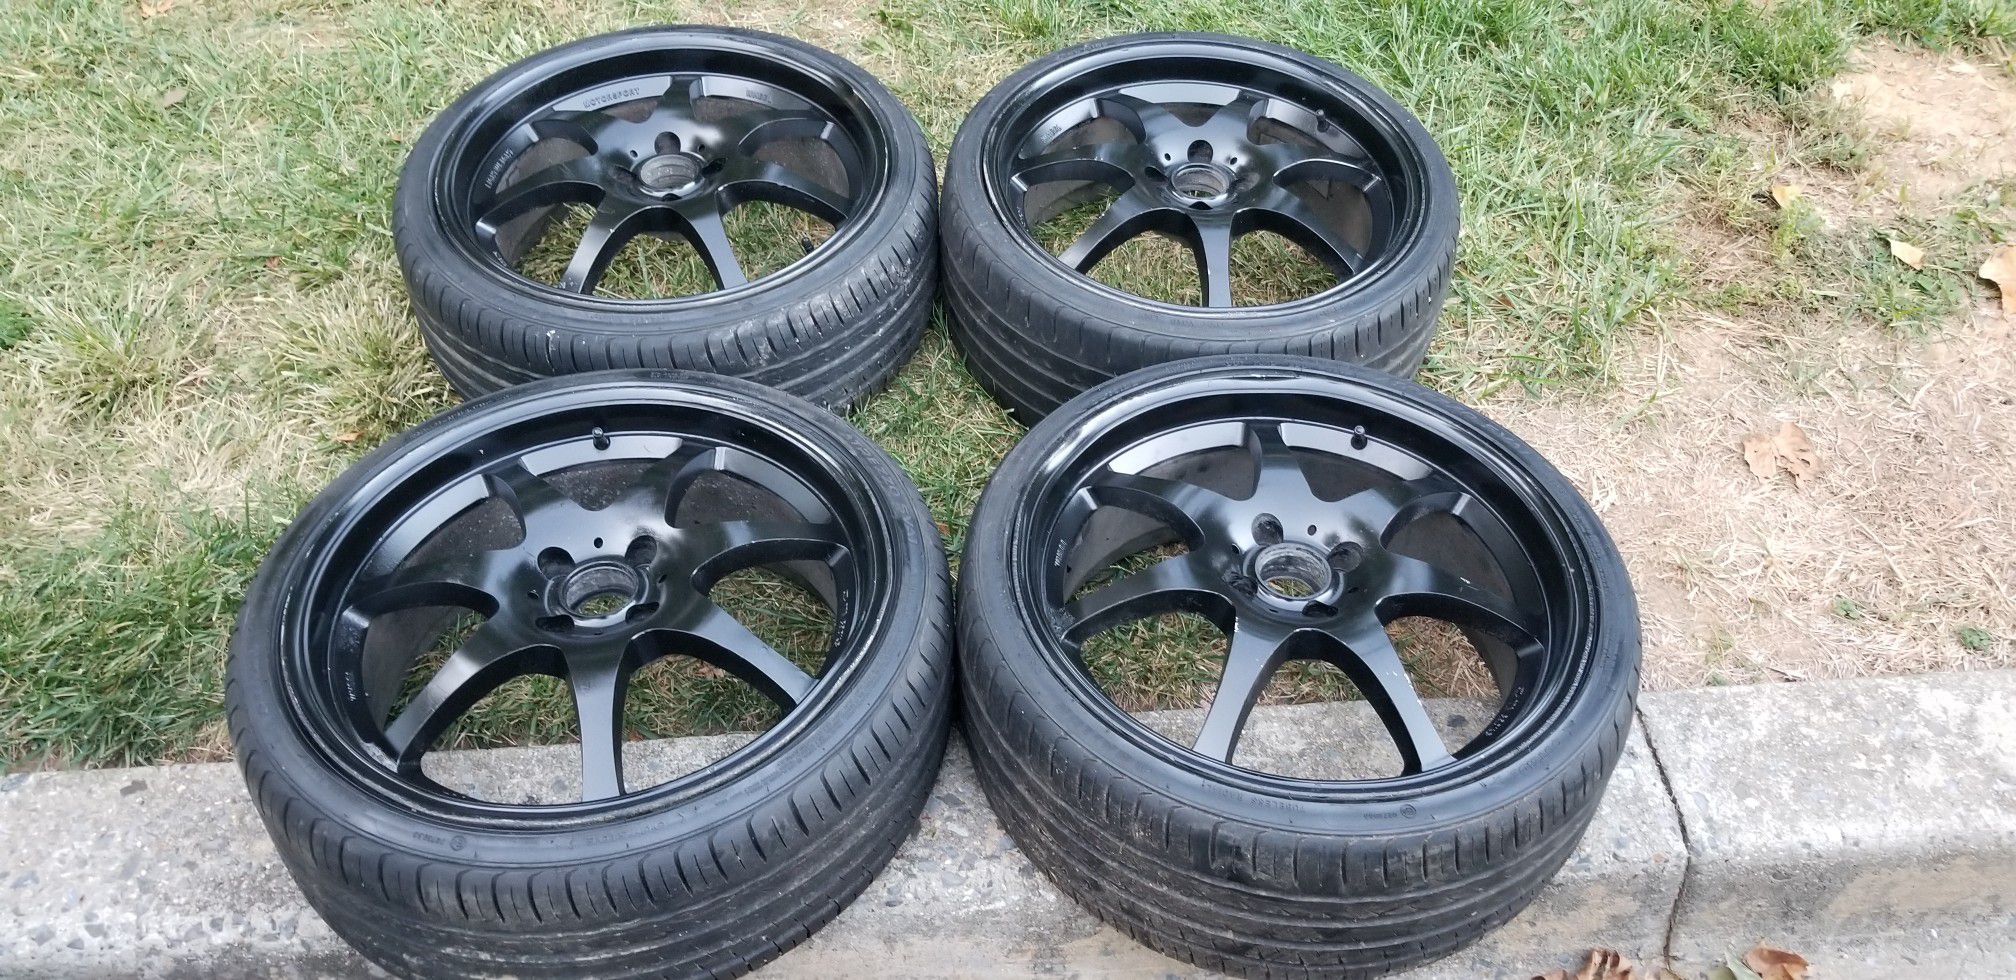 4x100 bolt pattern wheels rims and tires not universal just 4x100